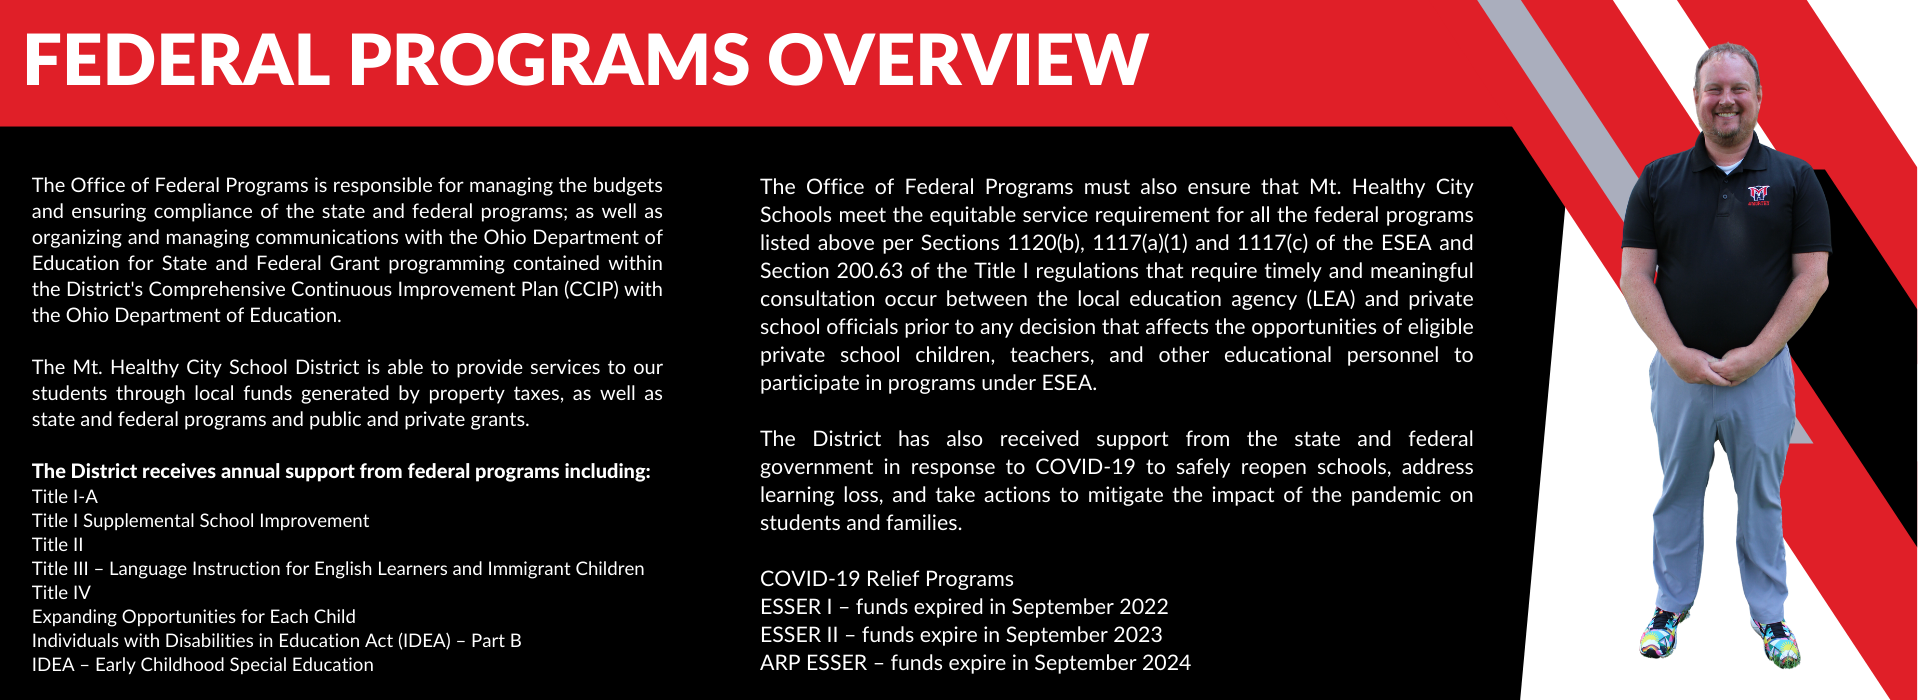 federal programs overview